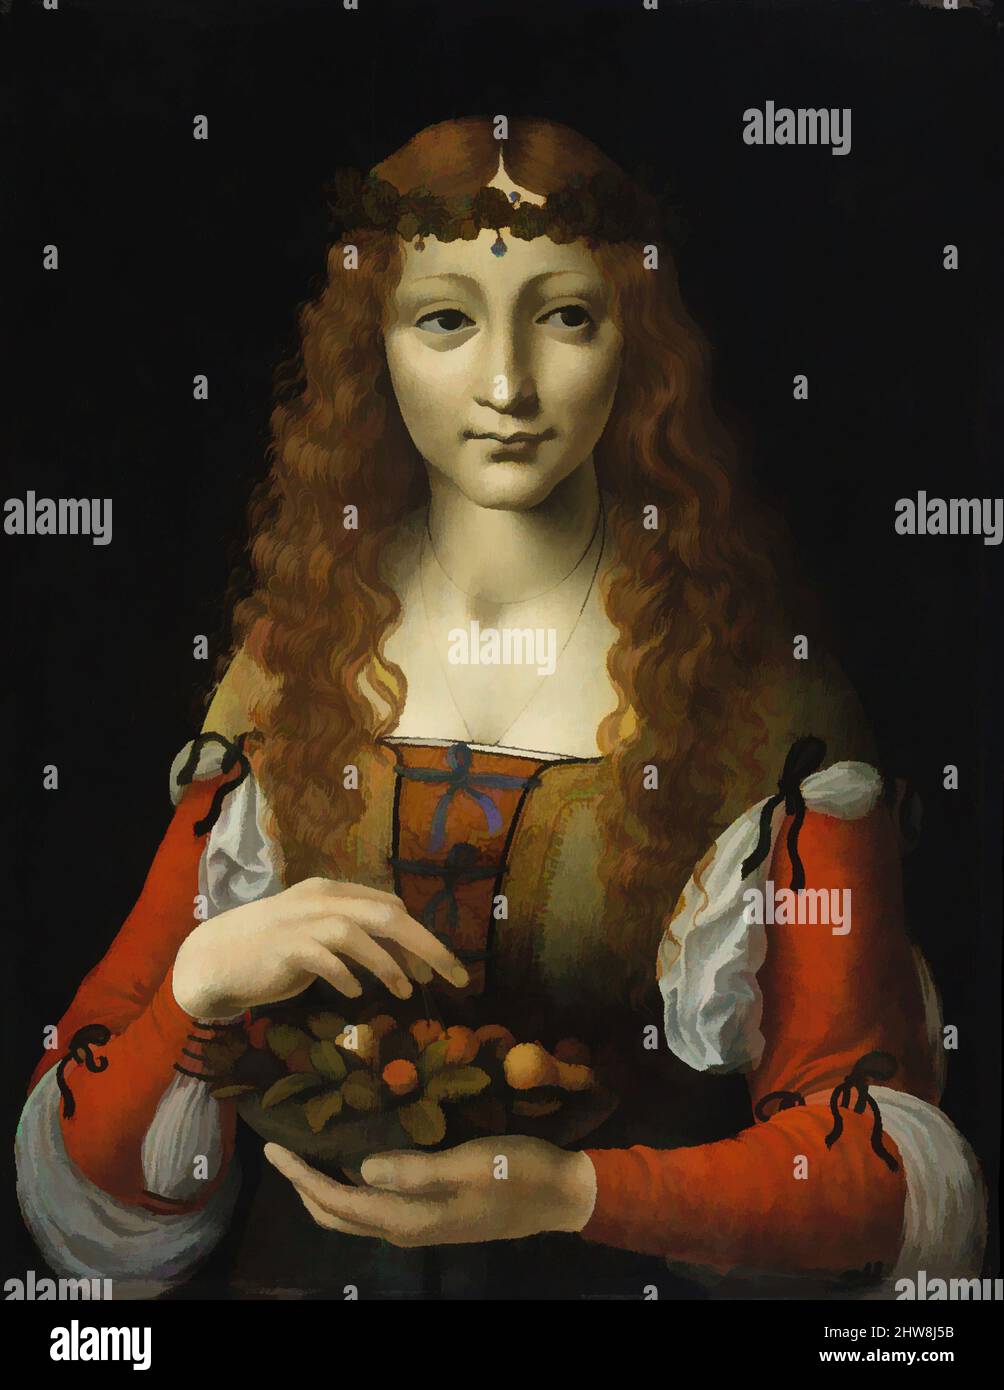 Art inspired by Girl with Cherries, ca. 1491–95, Oil on wood, 19 1/4 x 14 3/4 in. (48.9 x 37.5 cm), Paintings, Attributed to Giovanni Ambrogio de Predis (Italian, Milanese, active by 1472–died after 1508), Trained in Milan, Ambrogio de Predis was associated after 1483 with Leonardo da, Classic works modernized by Artotop with a splash of modernity. Shapes, color and value, eye-catching visual impact on art. Emotions through freedom of artworks in a contemporary way. A timeless message pursuing a wildly creative new direction. Artists turning to the digital medium and creating the Artotop NFT Stock Photo